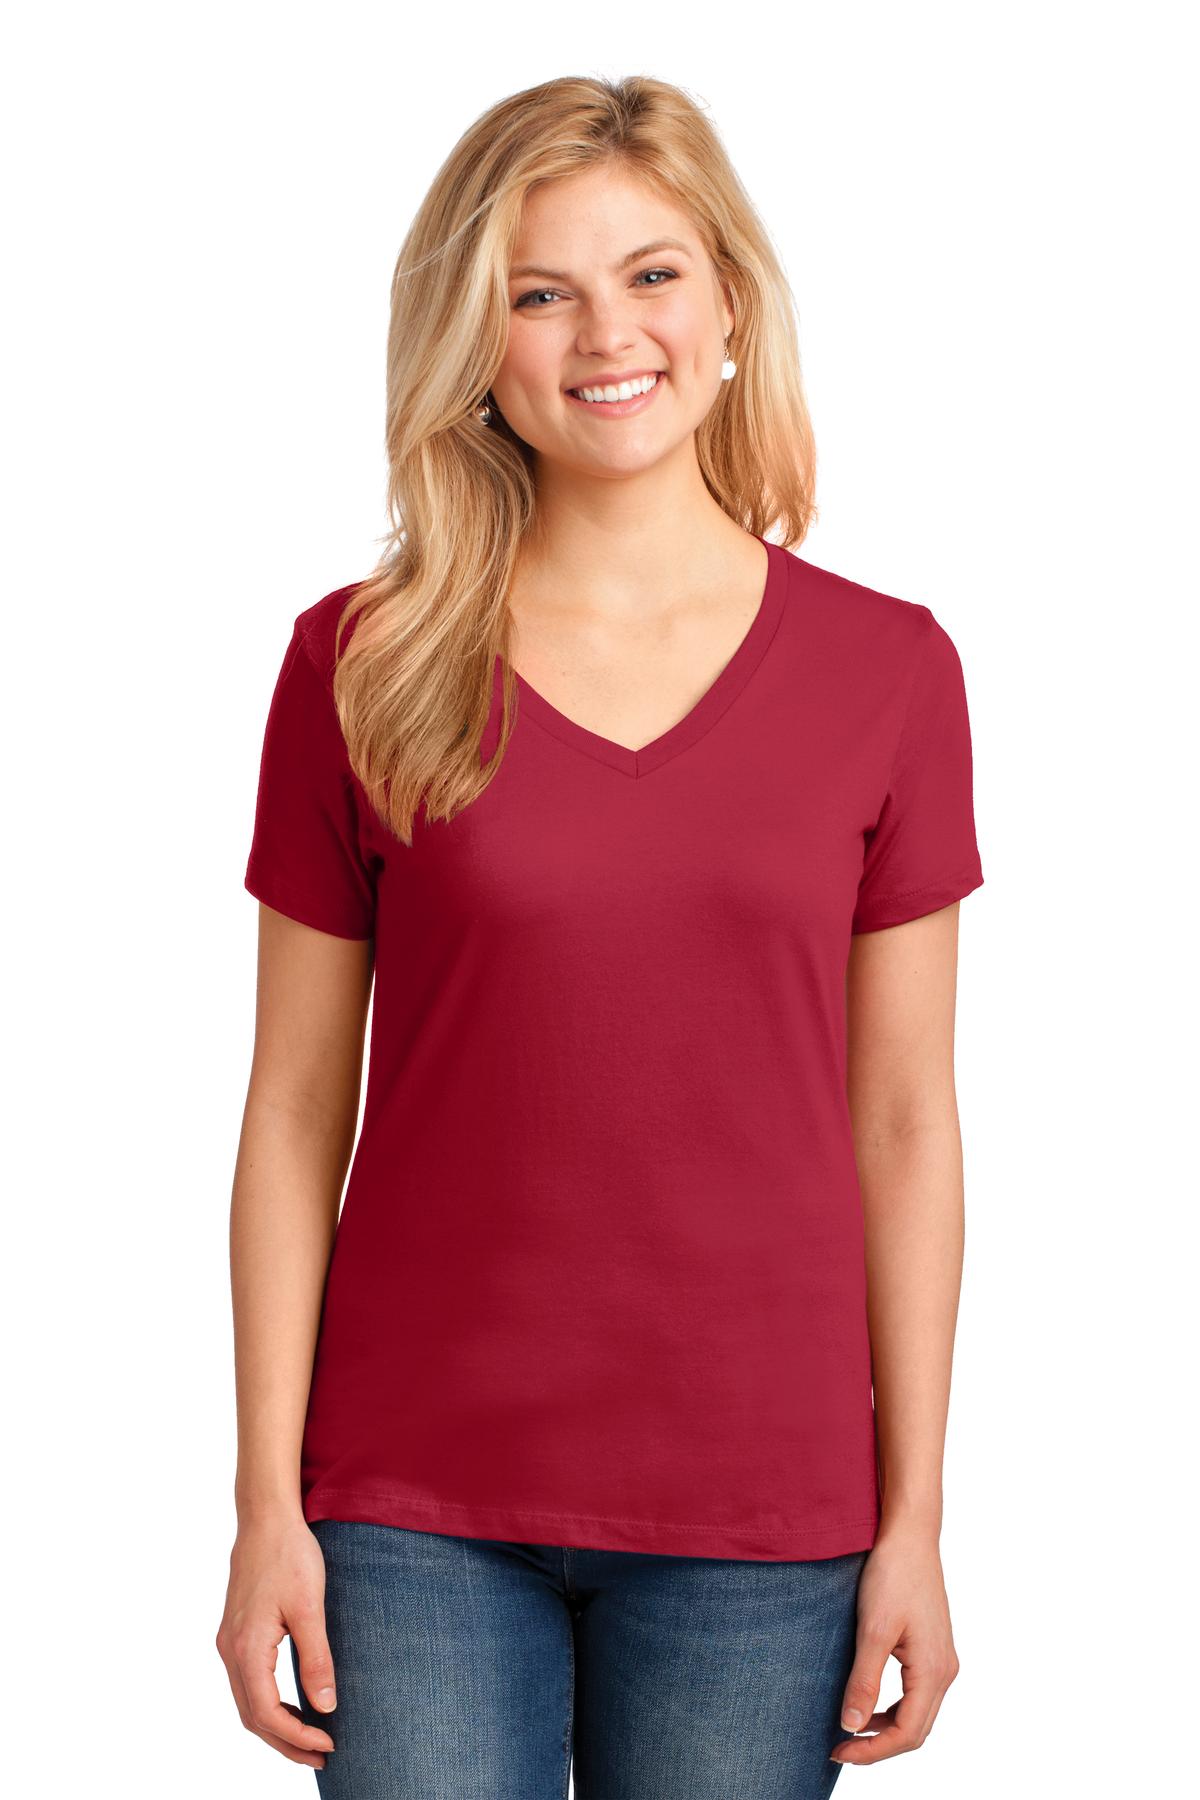 Photo of Port & Company Ladies LPC54V  color  Red